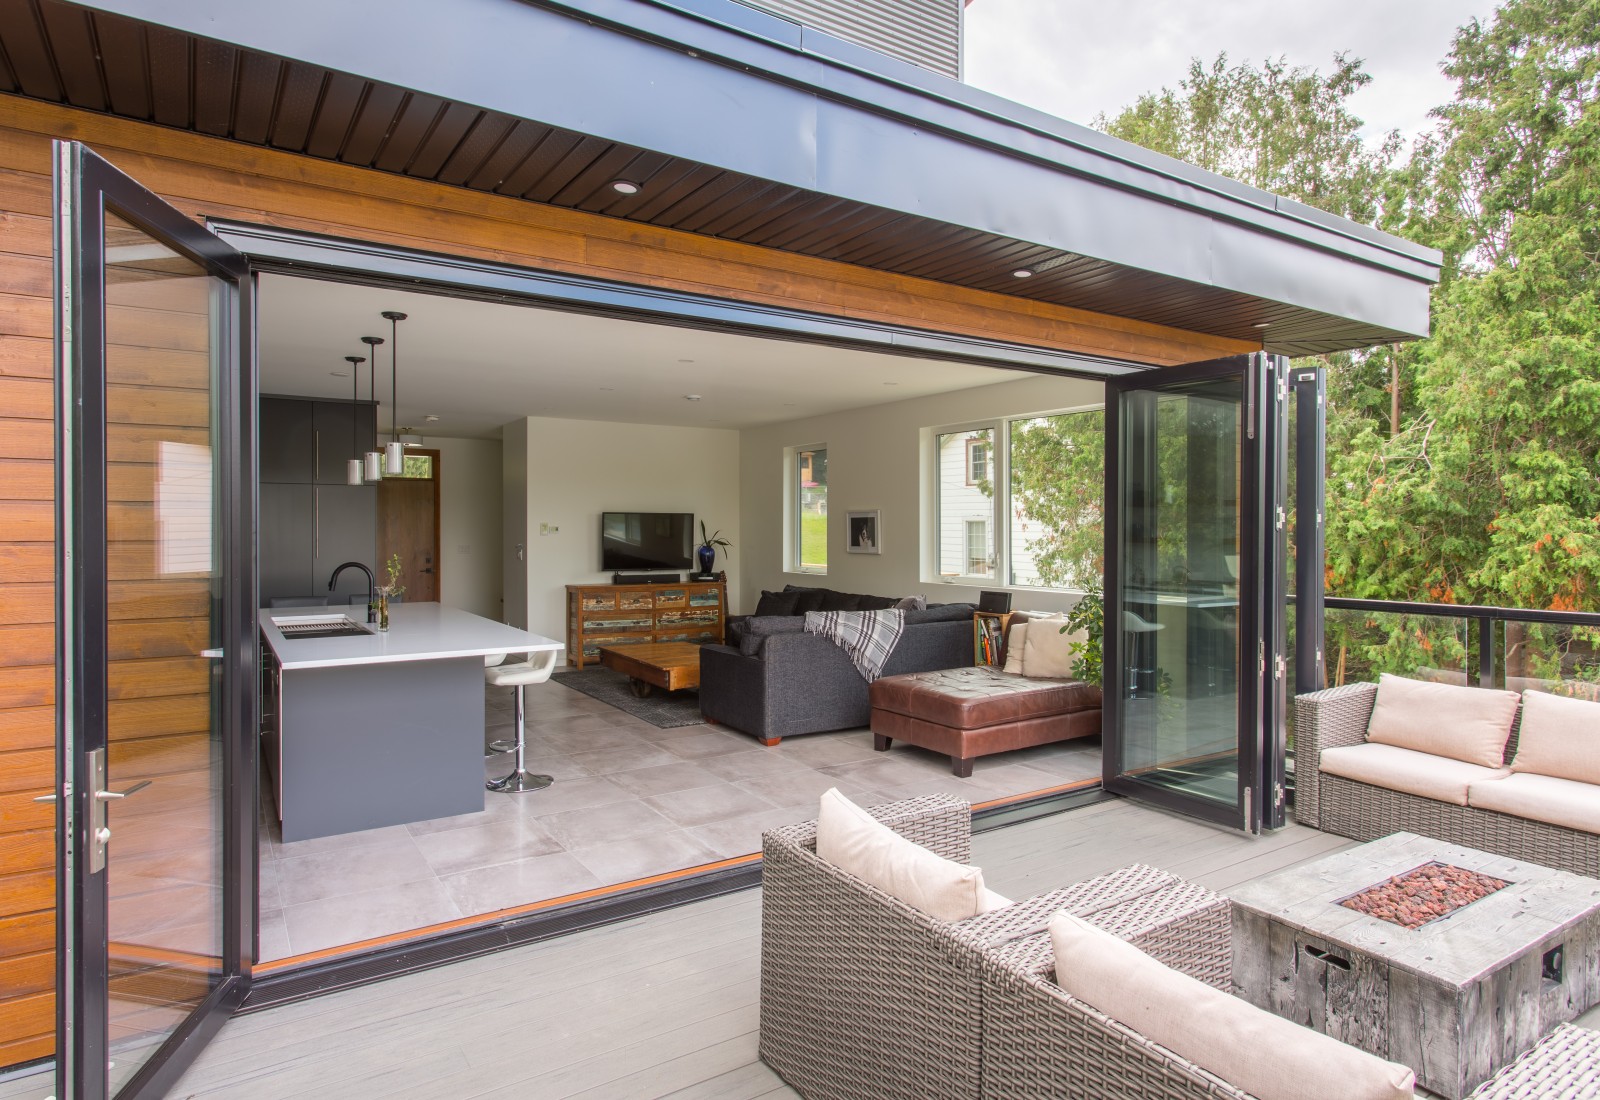 Bi-Fold glass doors allow the conversation to easily be carried from the main floor out to the patio